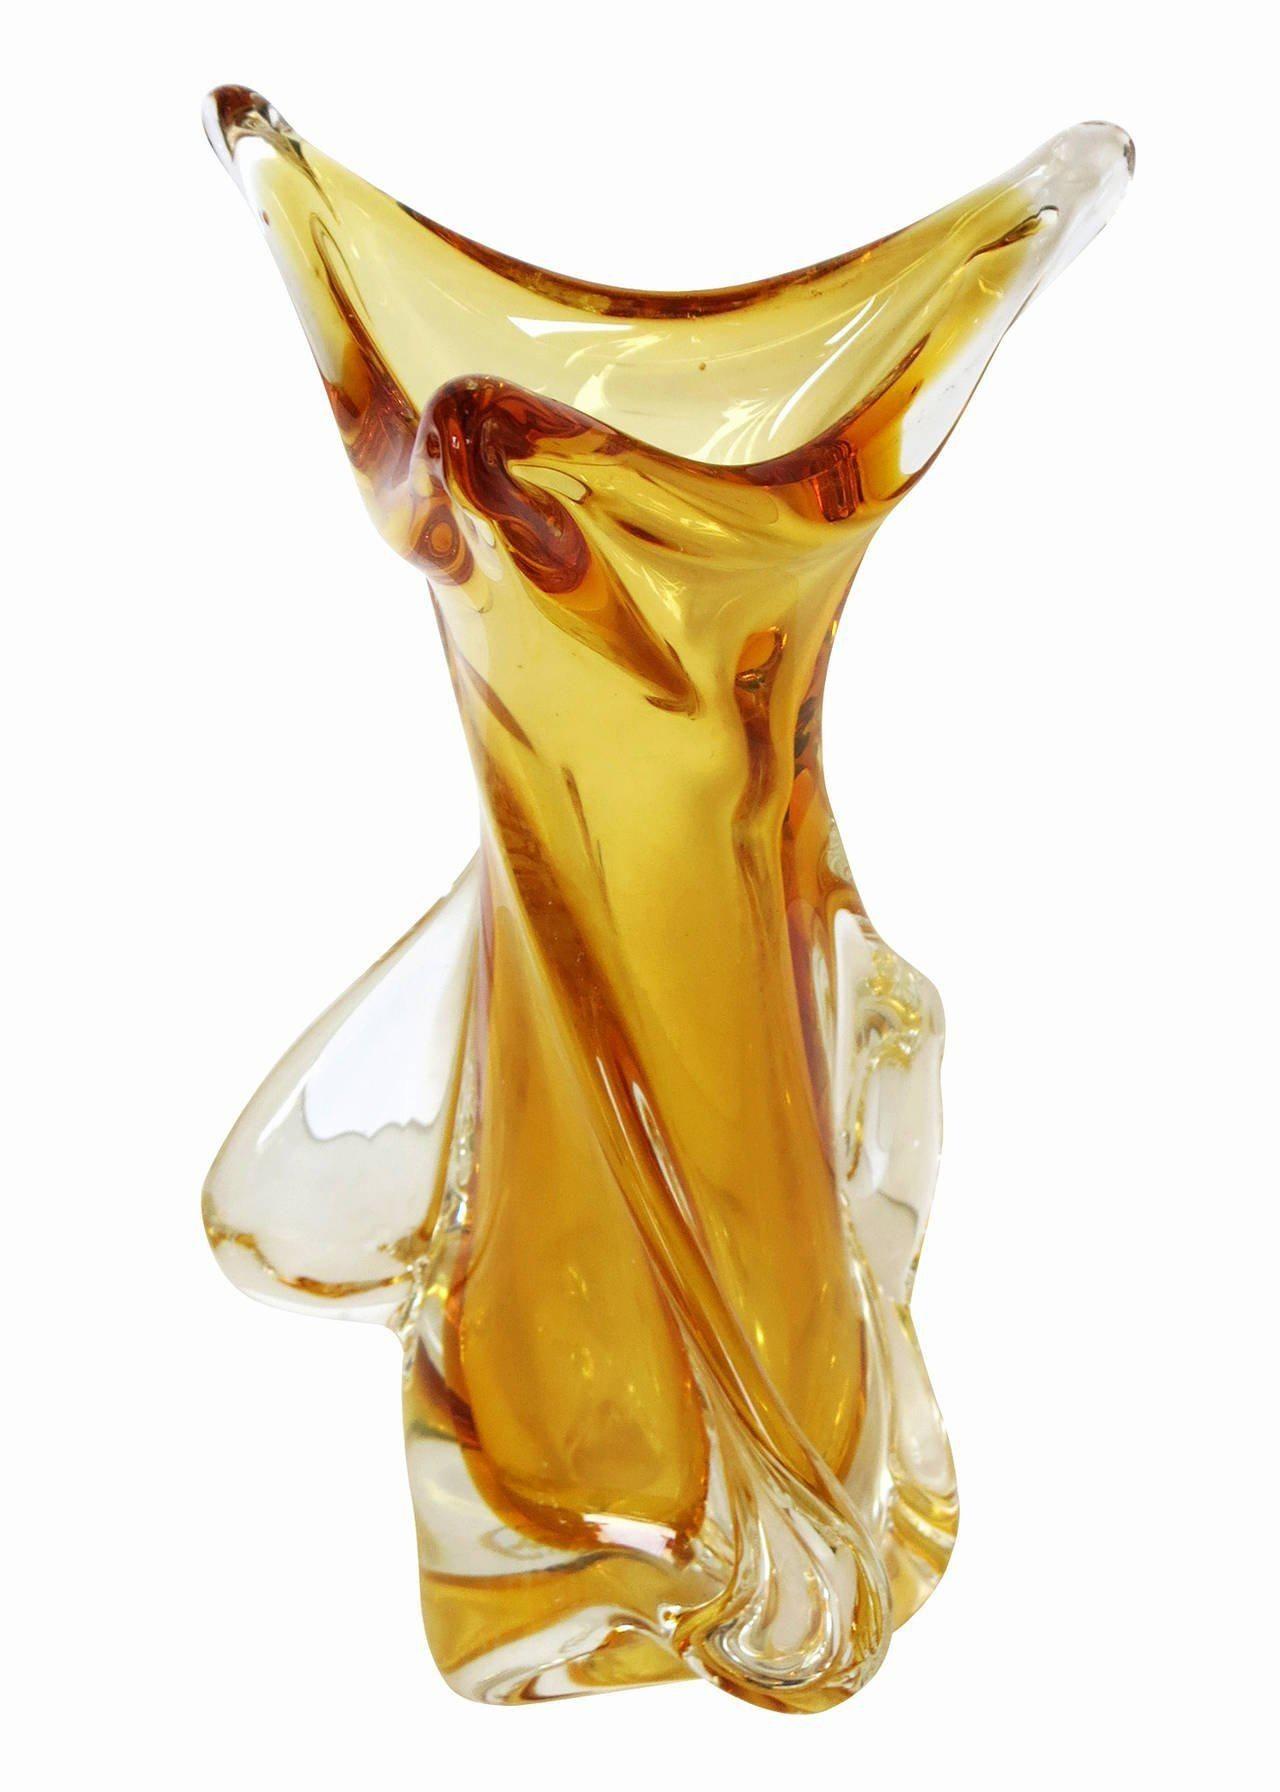 This piece is a free form art glass vase by Chalet, featuring a honey amber color accented by crystal clear edges. It possesses a free formed twist design, decorative fins, and spires along the top.